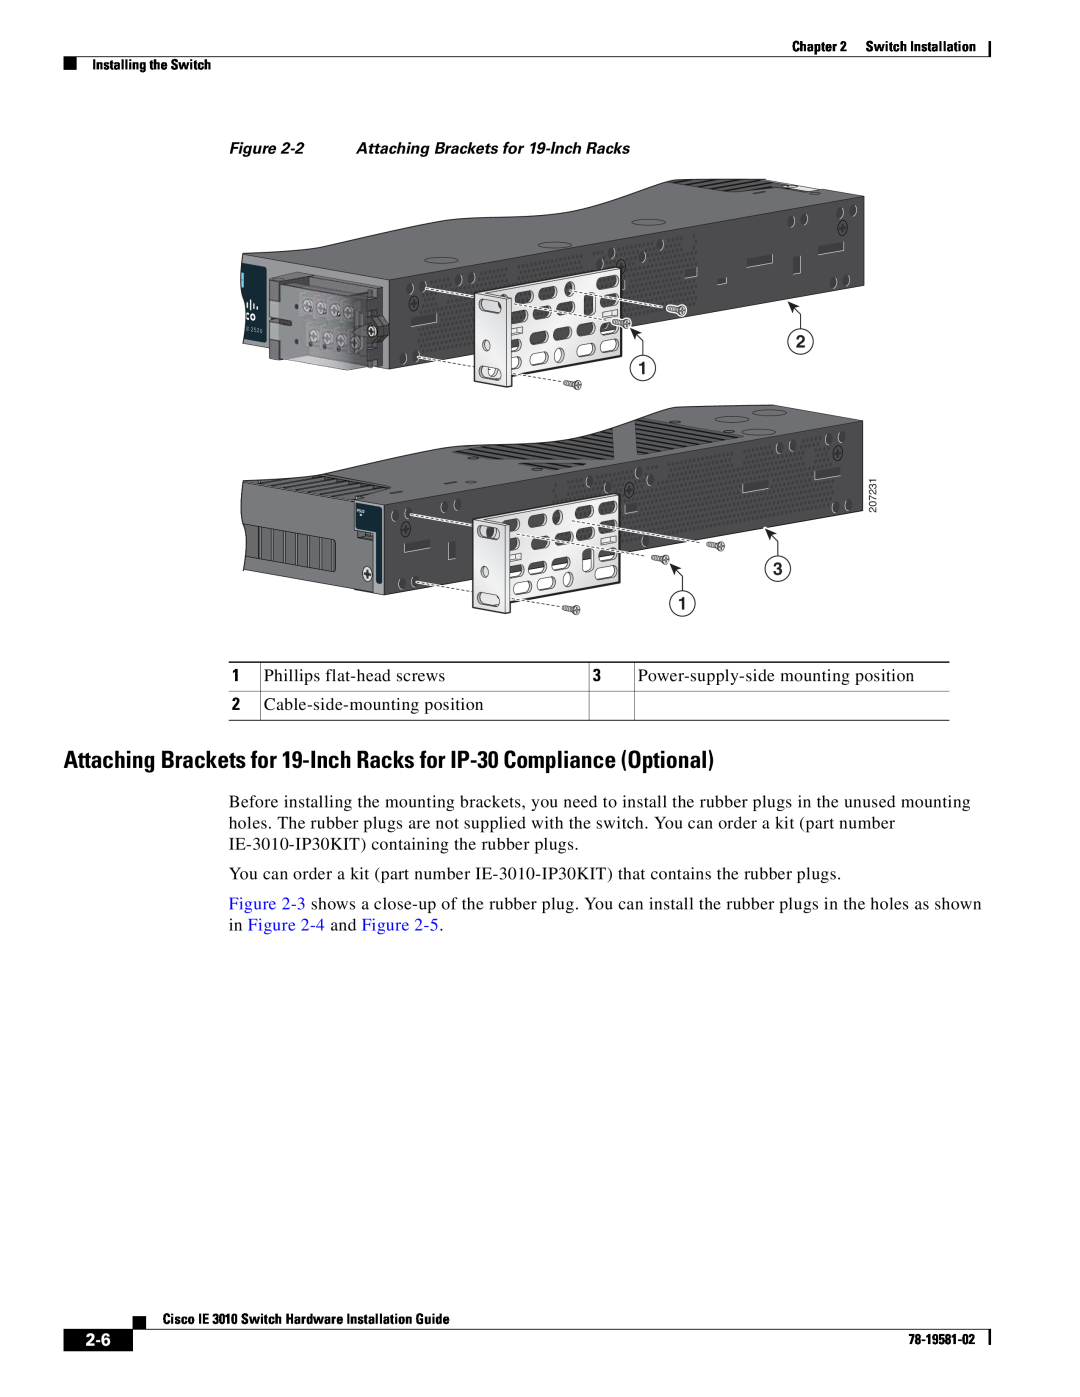 Cisco Systems IE301024TC manual Attaching Brackets for 19-Inch Racks for IP-30 Compliance Optional 